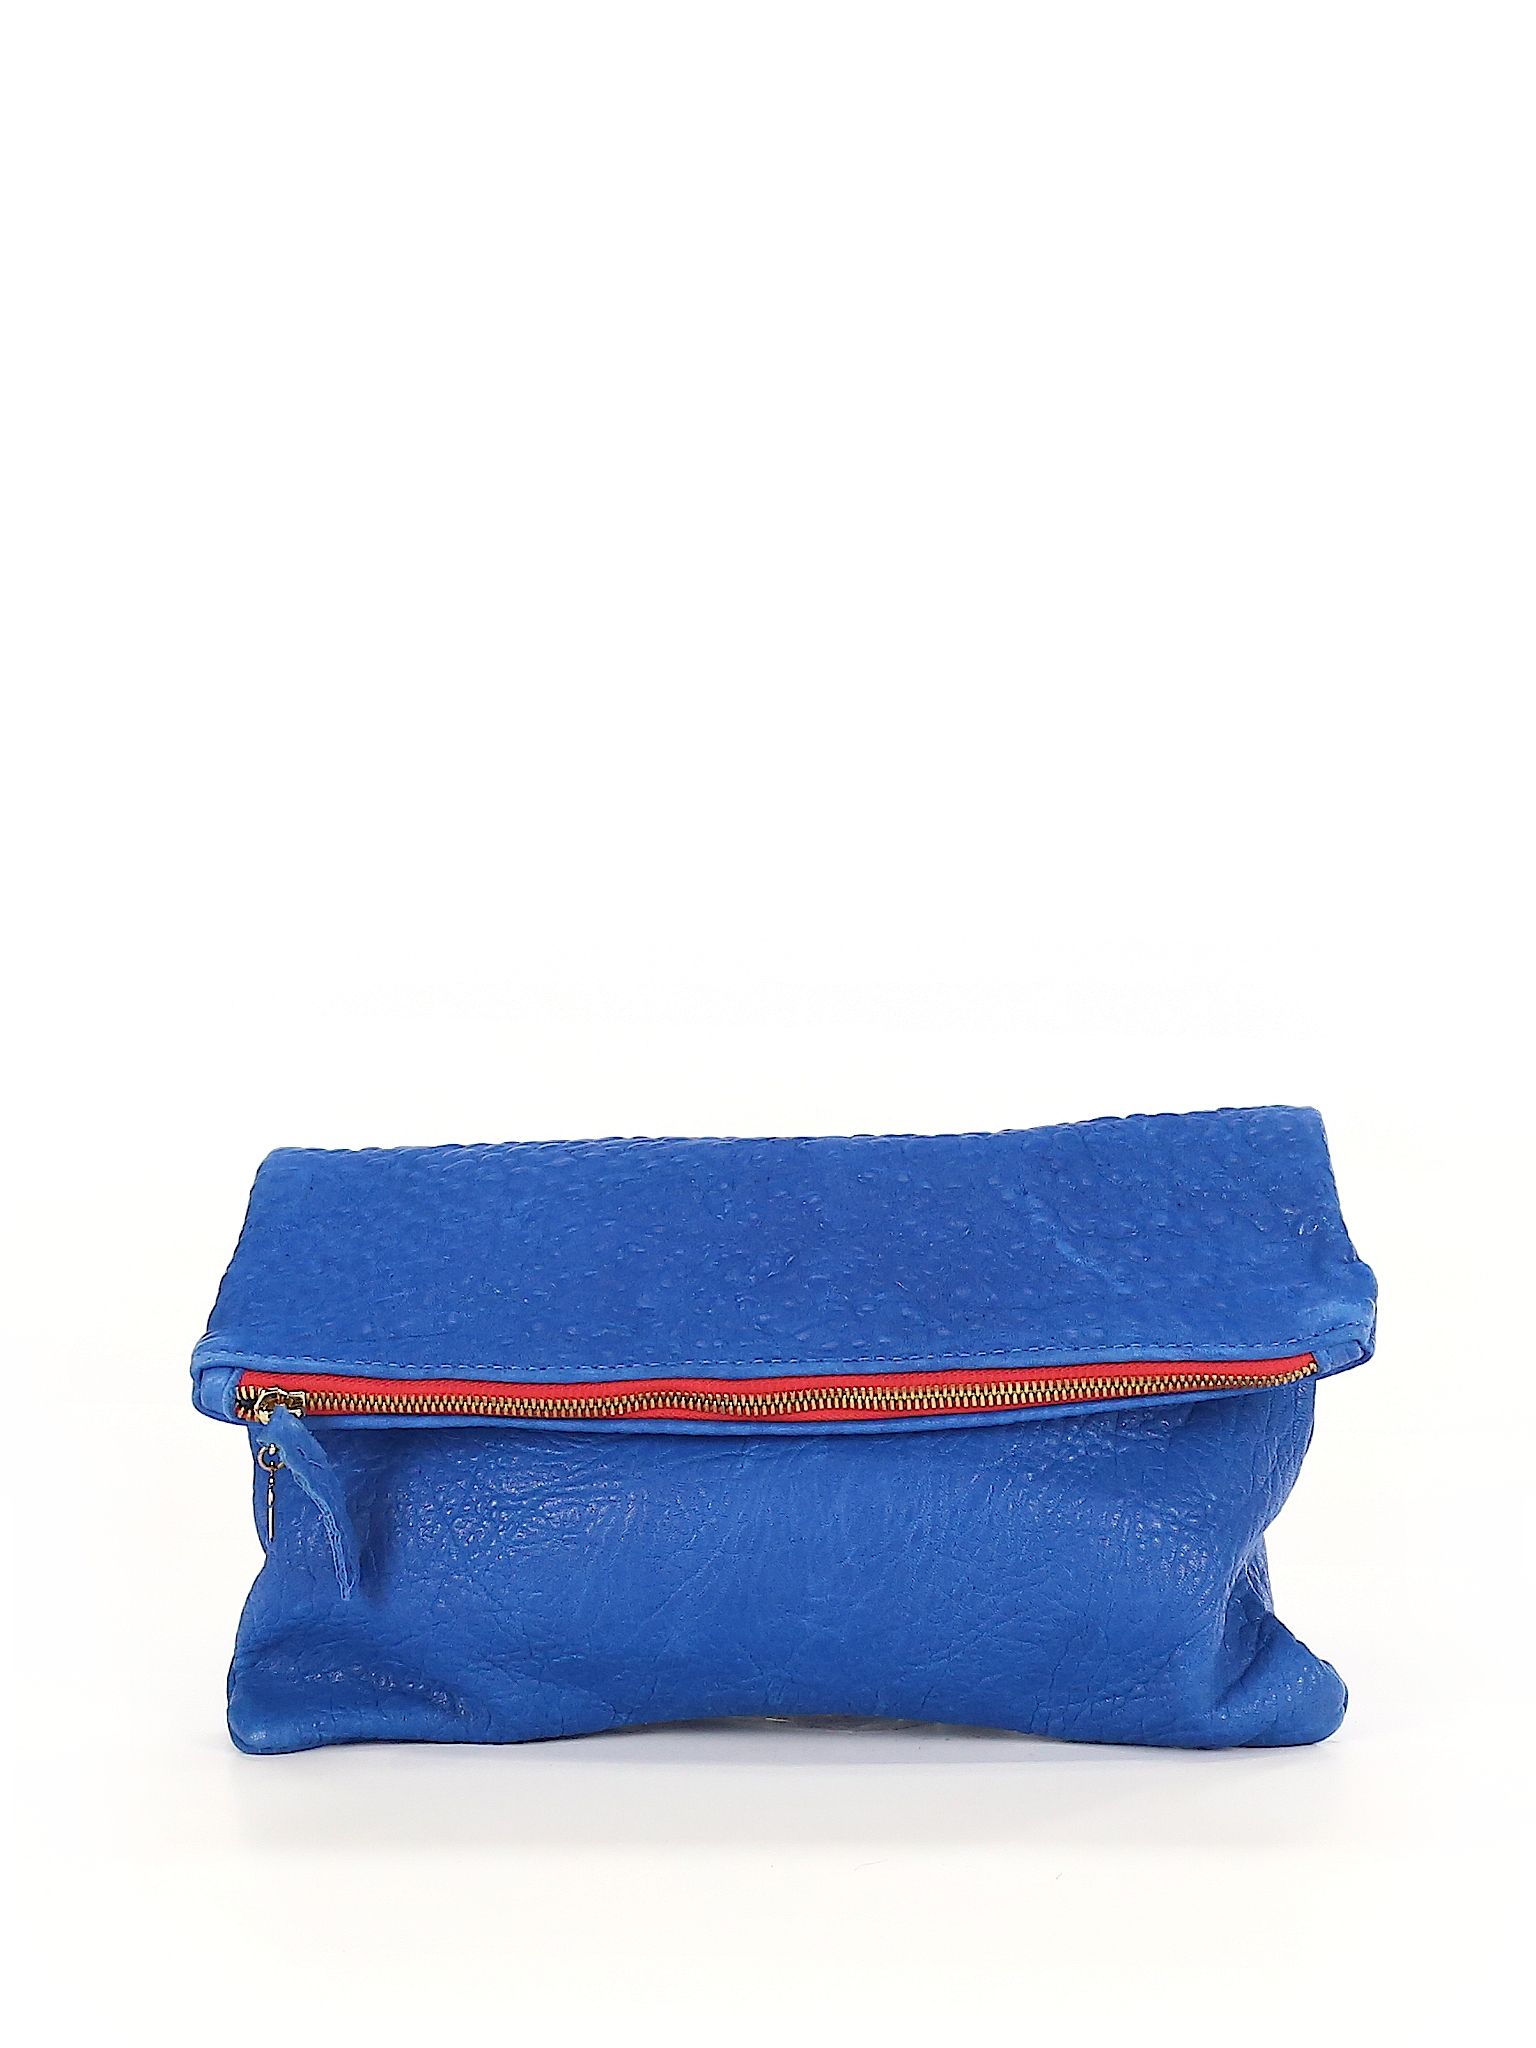 Clare Vivier Leather Clutch Size NA: Navy Blue Women's Bags - 35901191 | thredUP